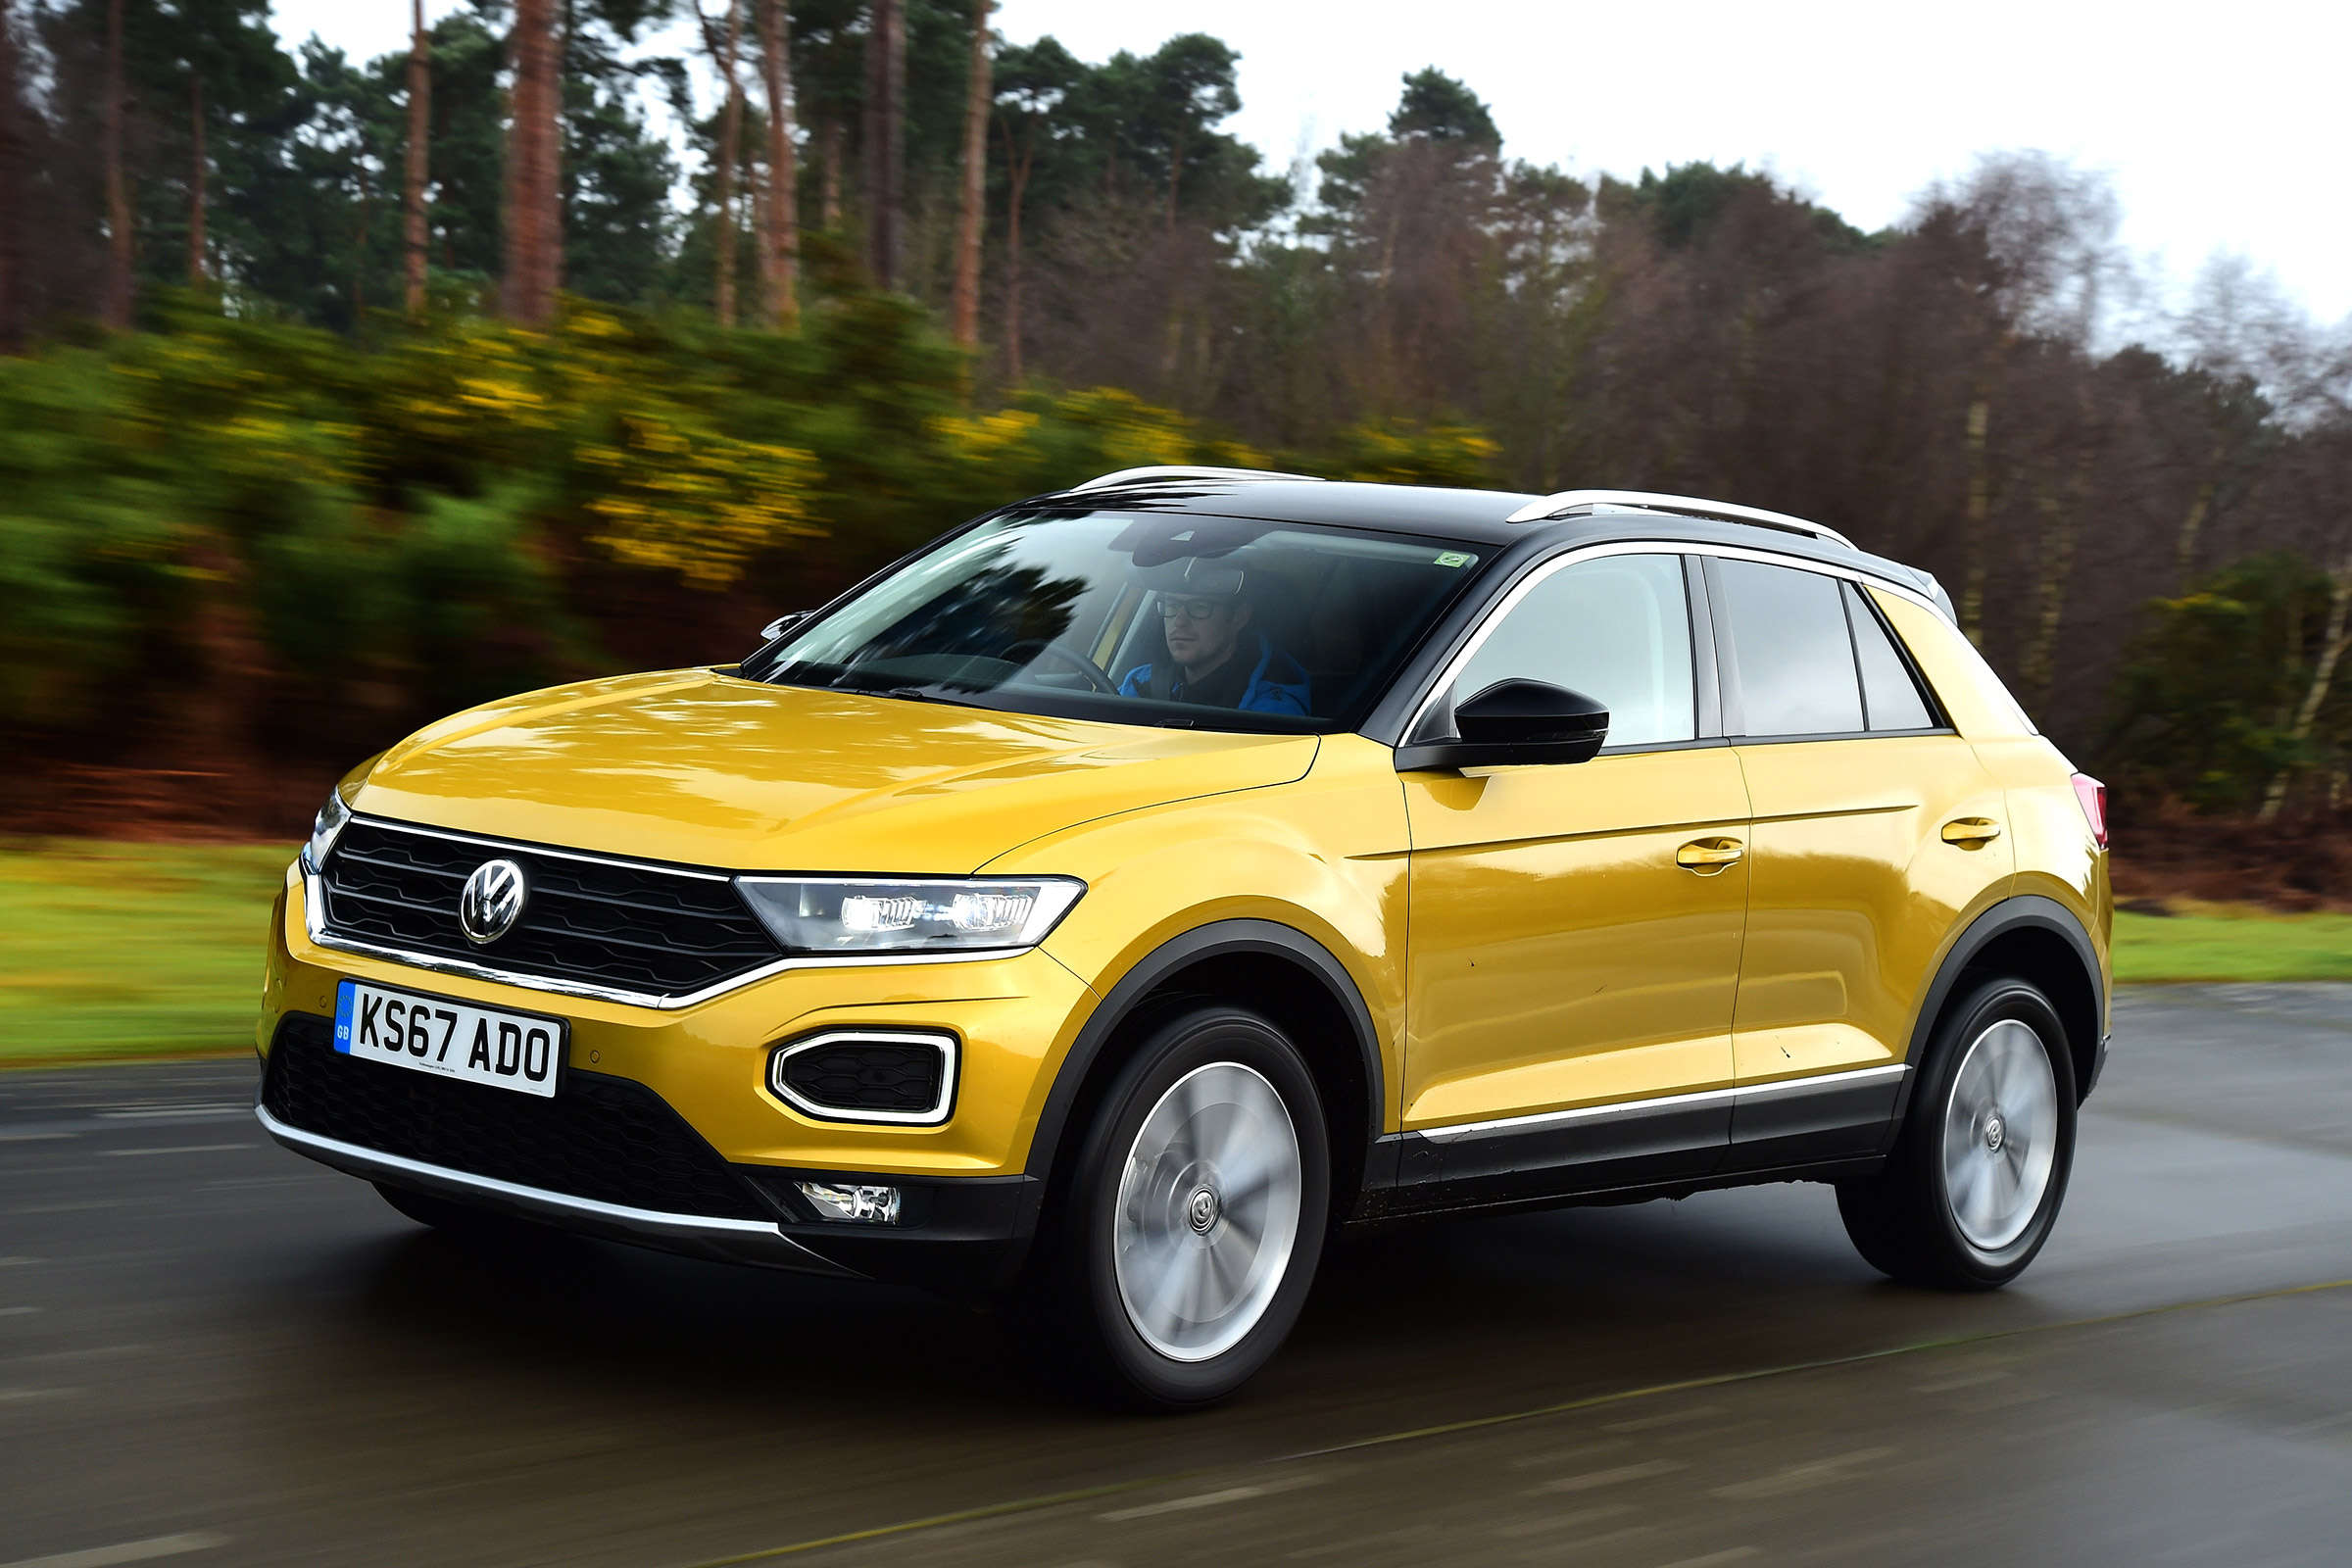 VW’s TRoc SUV perfect for a small family who love